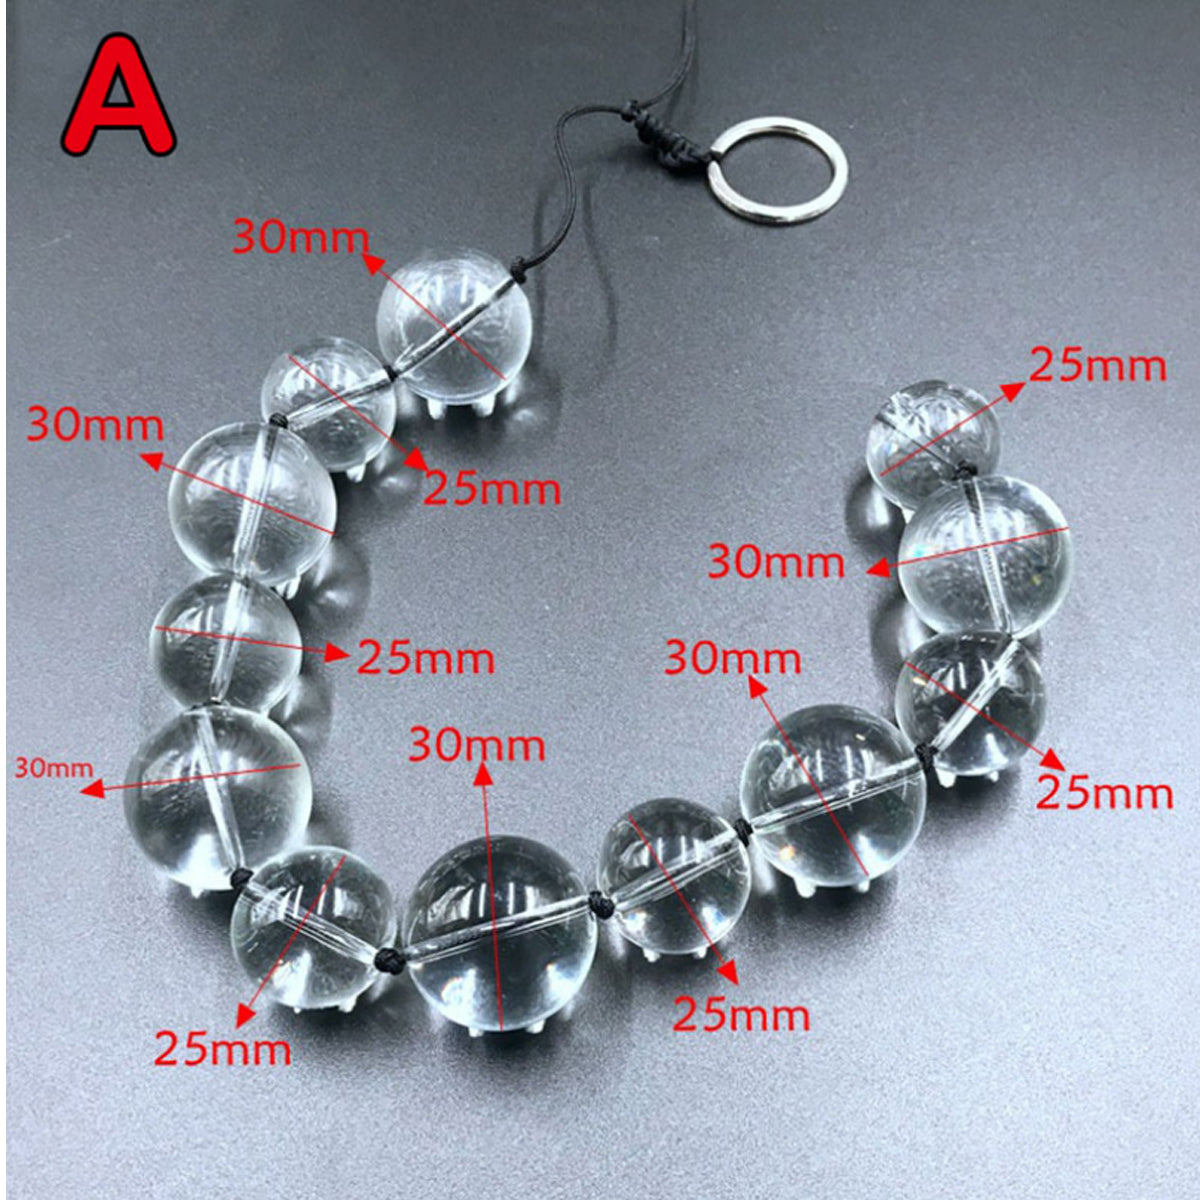 TPFSecret glass anal beads anal beads for men and women - different lengths and diameters